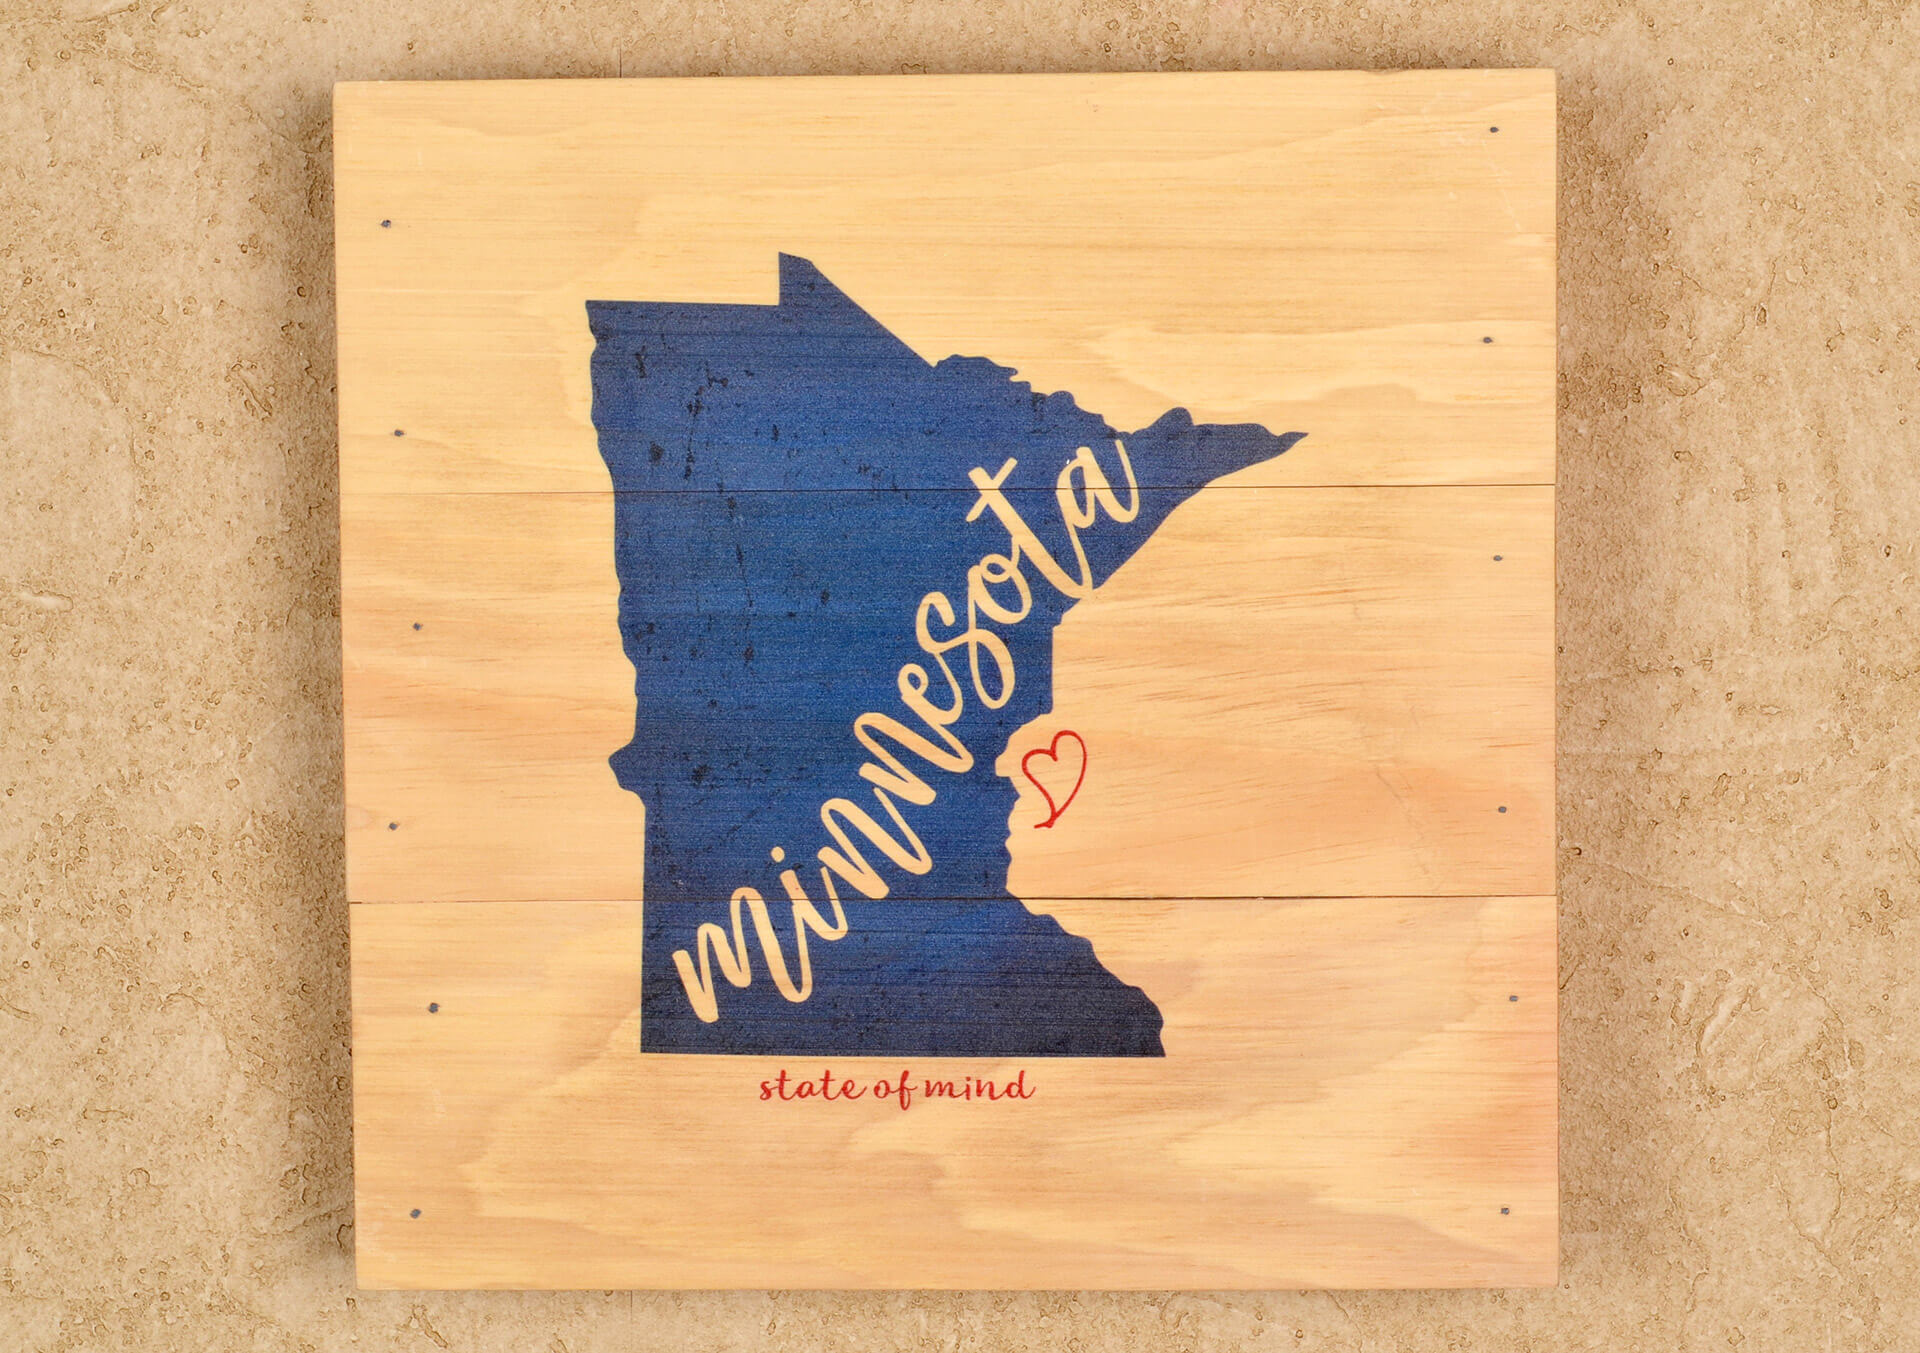 Shop for Minnesota Gifts and Home Decor at Bachman's